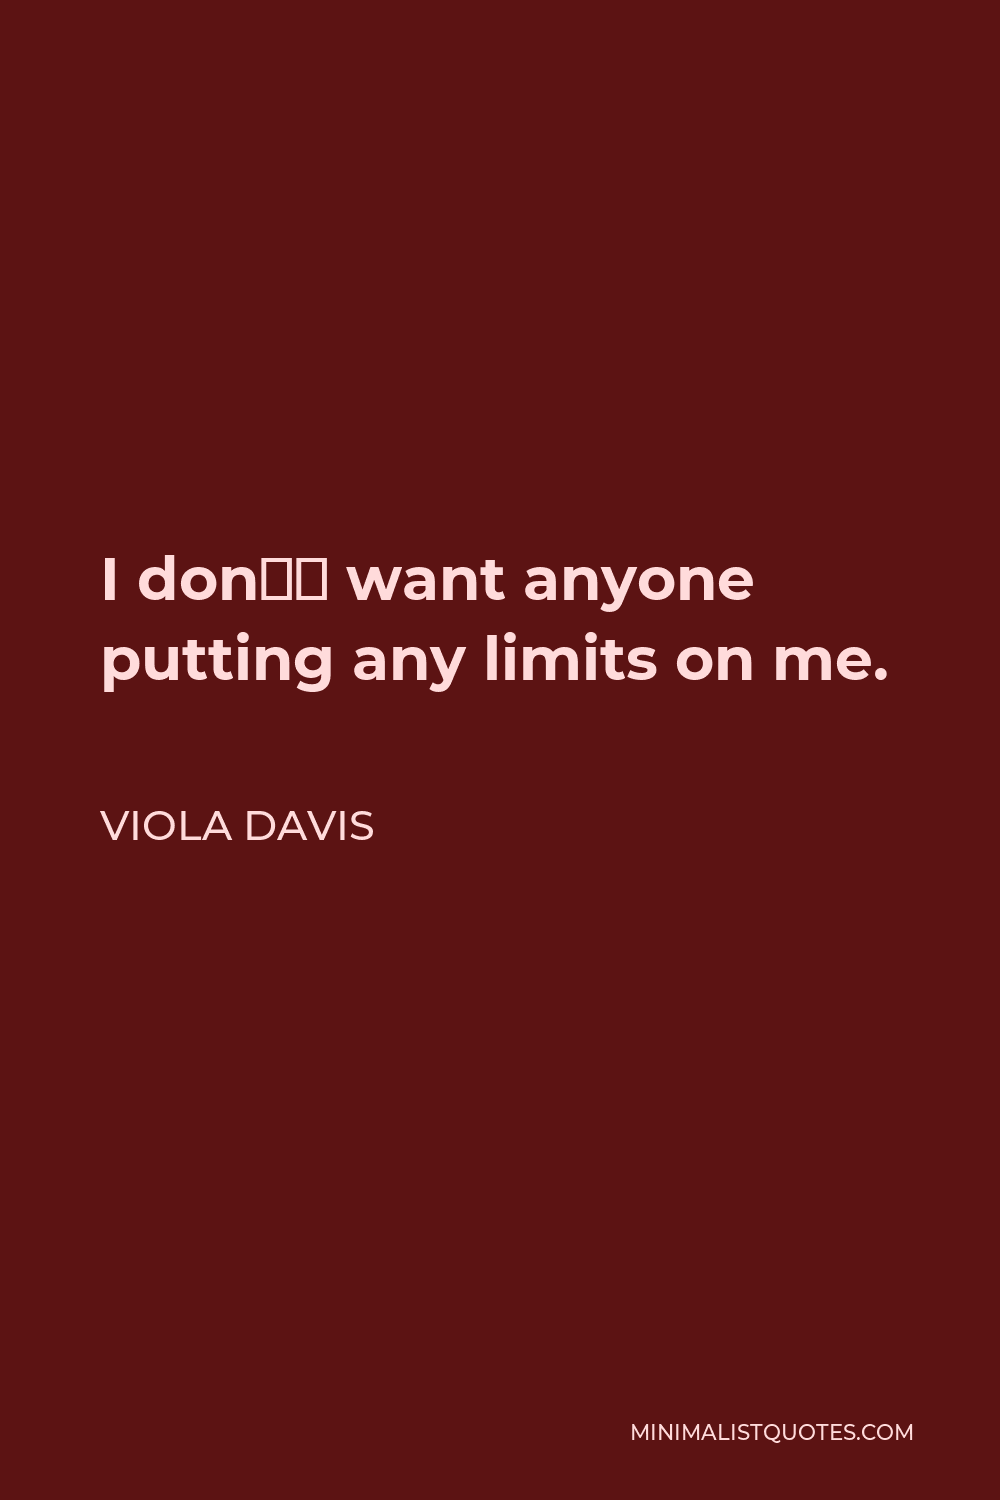 Viola Davis Quote - I don’t want anyone putting any limits on me.